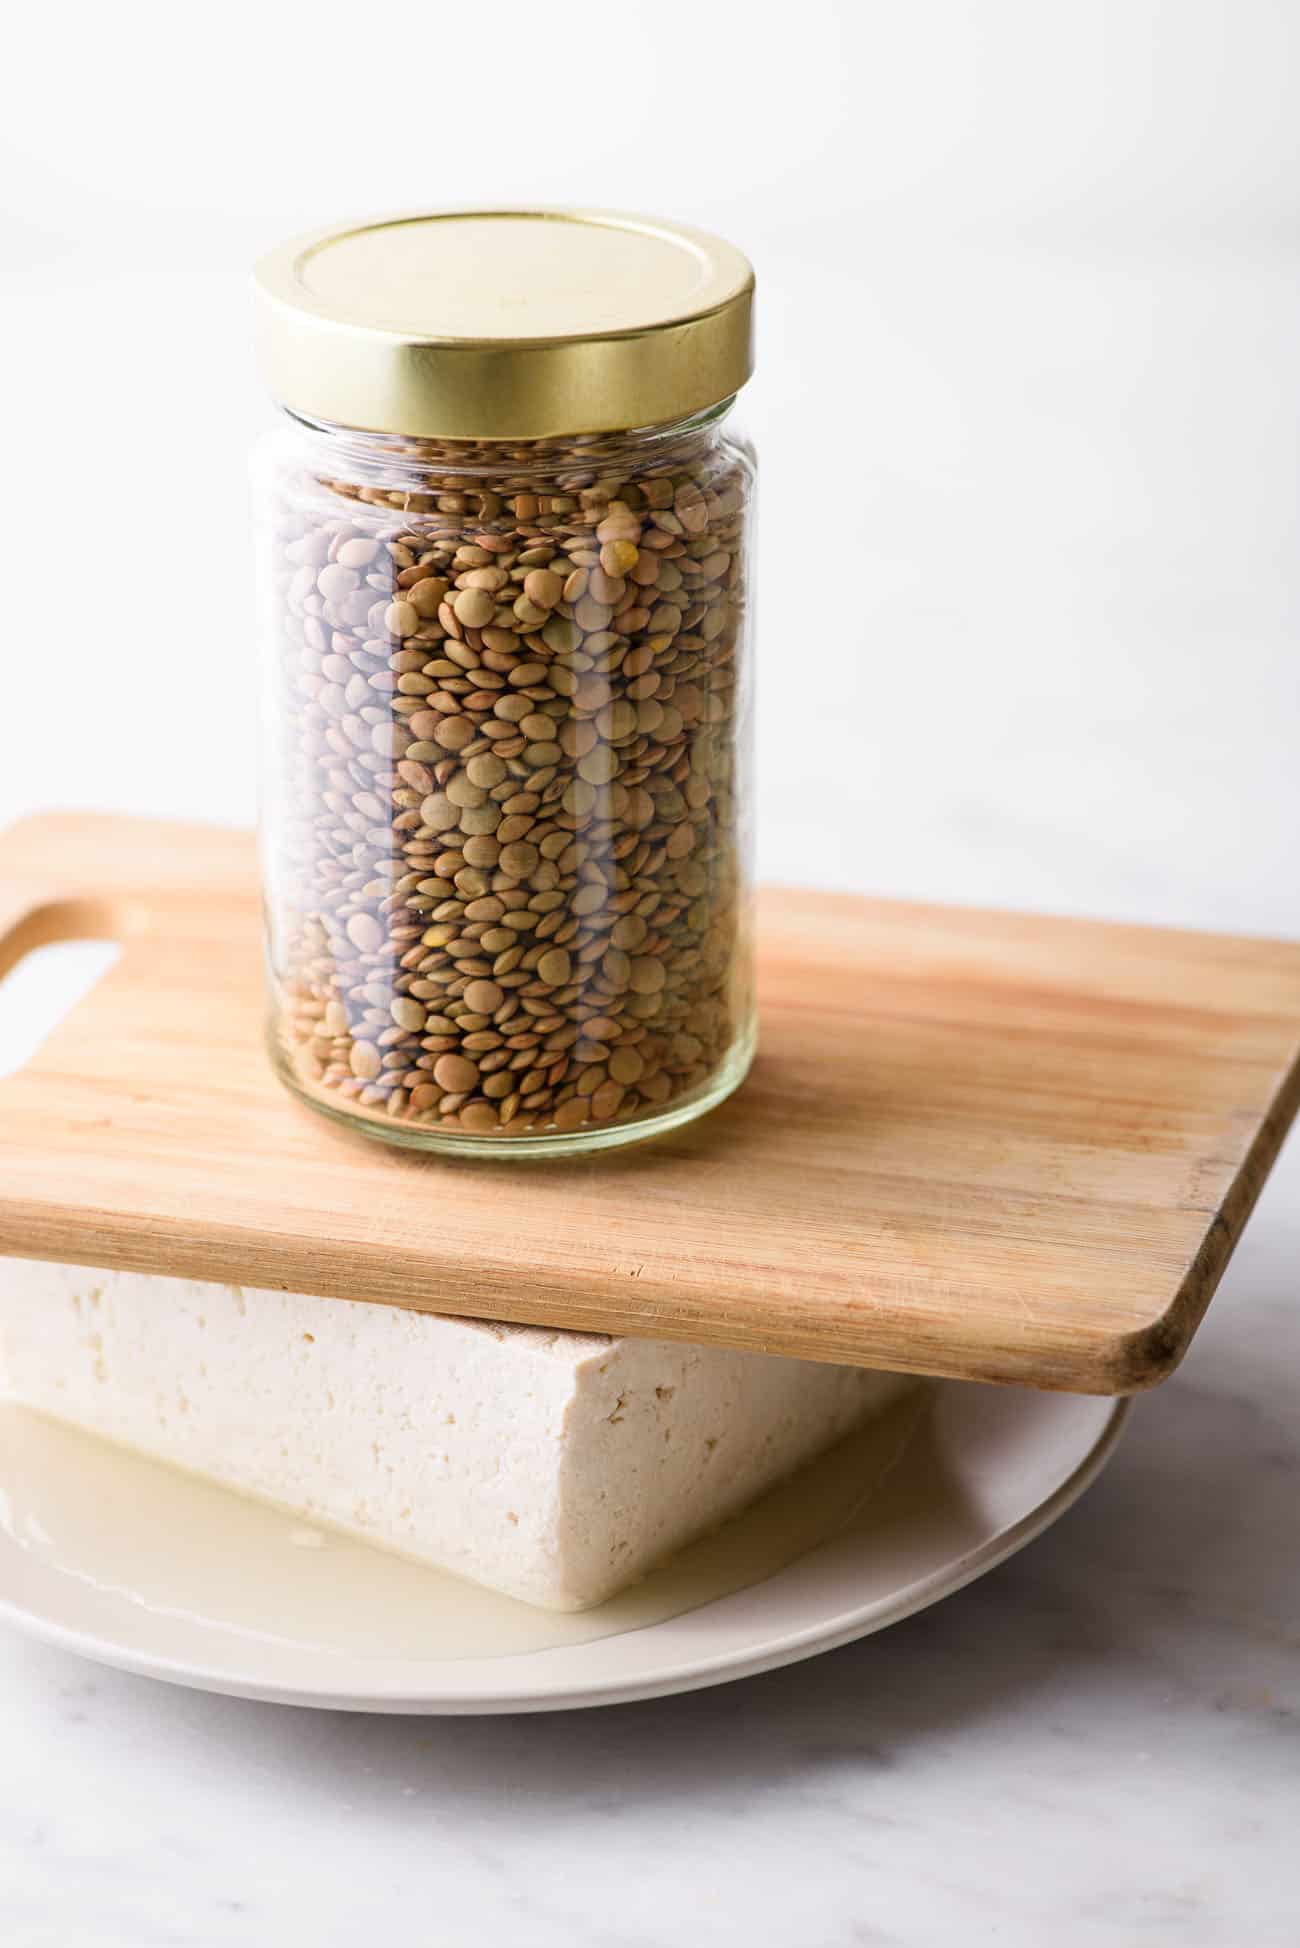 Tofu on a white plate being weighed down by a small wooden board and a jar of lentils - how to press tofu without a tofu press